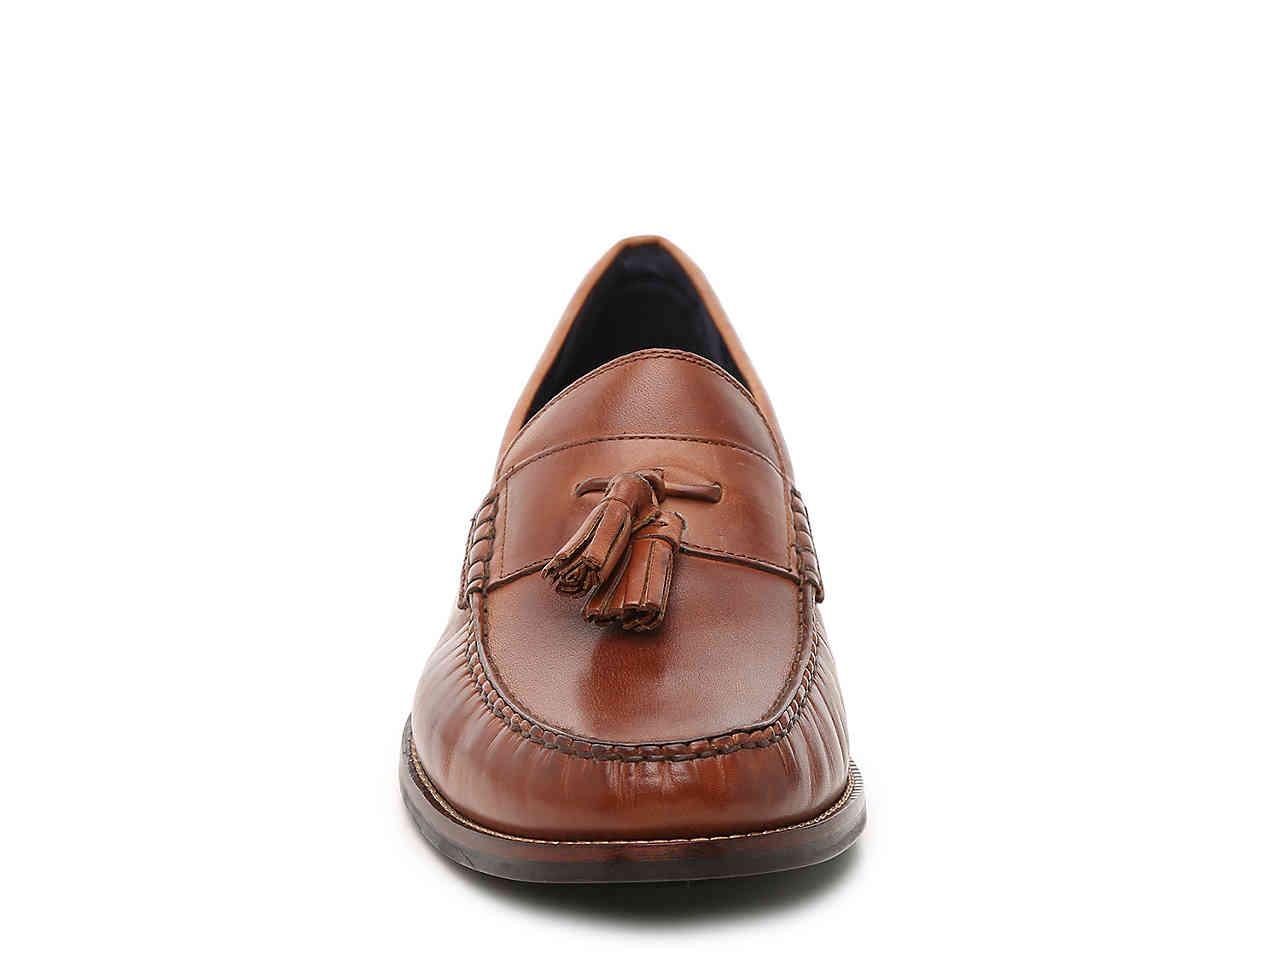 COLE HAAN 3120 Mens Pinch Grand Classic Leather Tassel Loafers Shoes BHFO